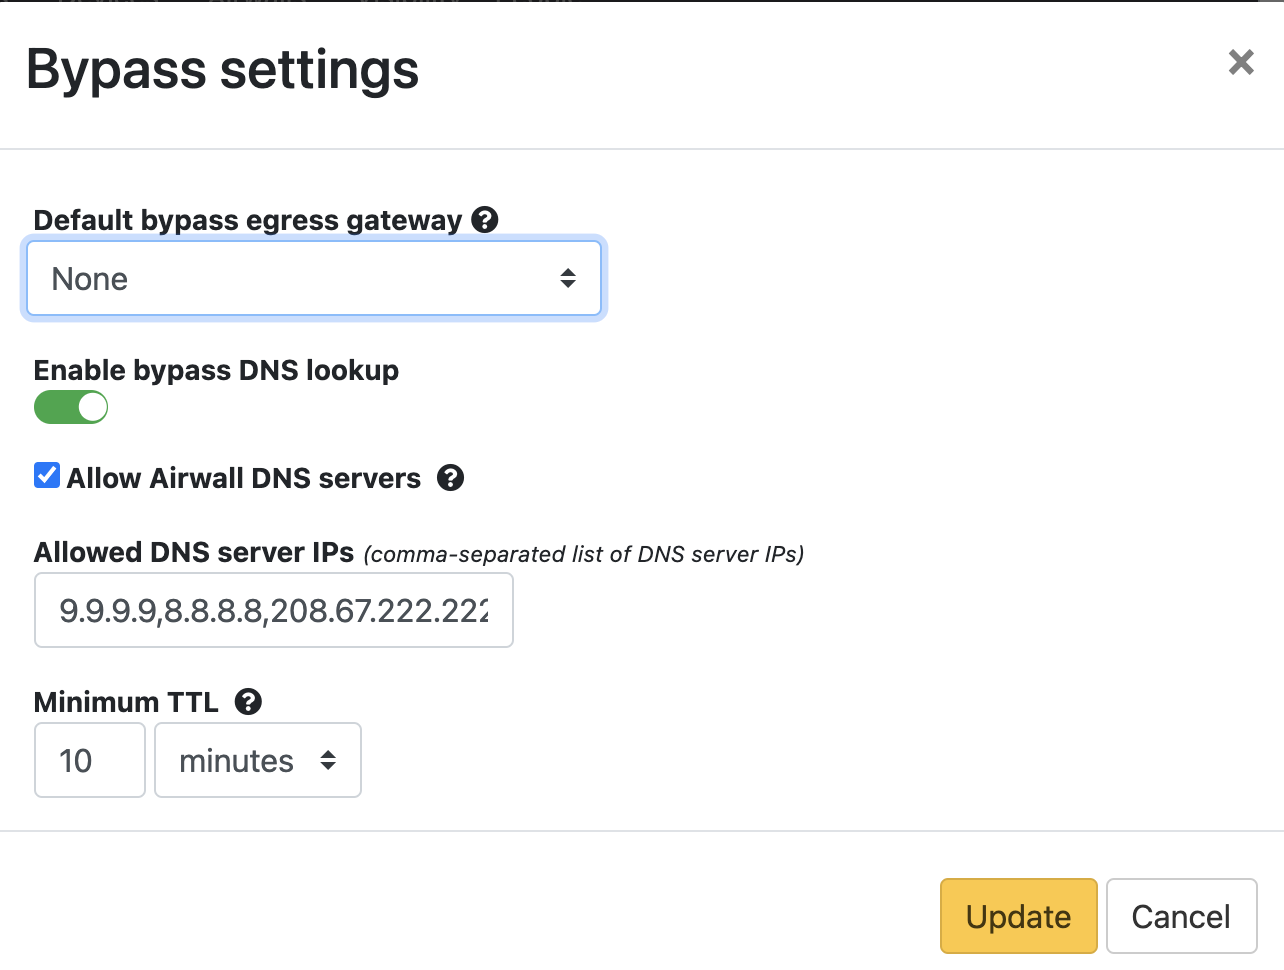 Set the default Bypass egress gateway in Conductor Settings